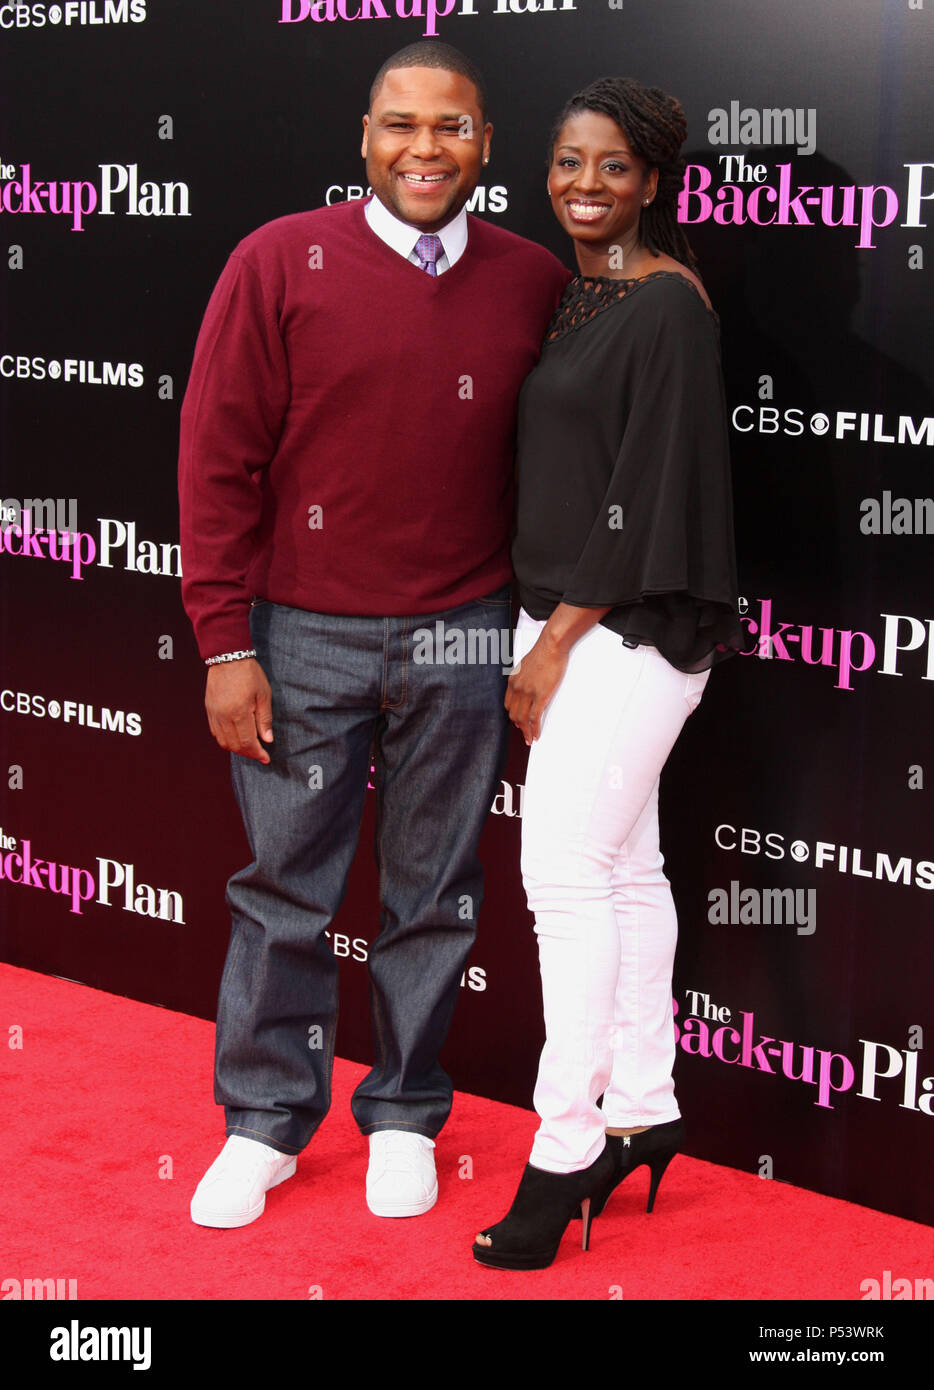 Anthony Anderson   Wife Alvina  20   - Back Up Plan Premiere at the Westwood Village Theatre In Los Angeles.Anthony Anderson   Wife Alvina  20  Event in Hollywood Life - California, Red Carpet Event, USA, Film Industry, Celebrities, Photography, Bestof, Arts Culture and Entertainment, Celebrities fashion, Best of, Hollywood Life, Event in Hollywood Life - California, Red Carpet and backstage, Music celebrities, Topix, Couple, family ( husband and wife ) and kids- Children, brothers and sisters inquiry tsuni@Gamma-USA.com, Credit Tsuni / USA, 2010 Stock Photo